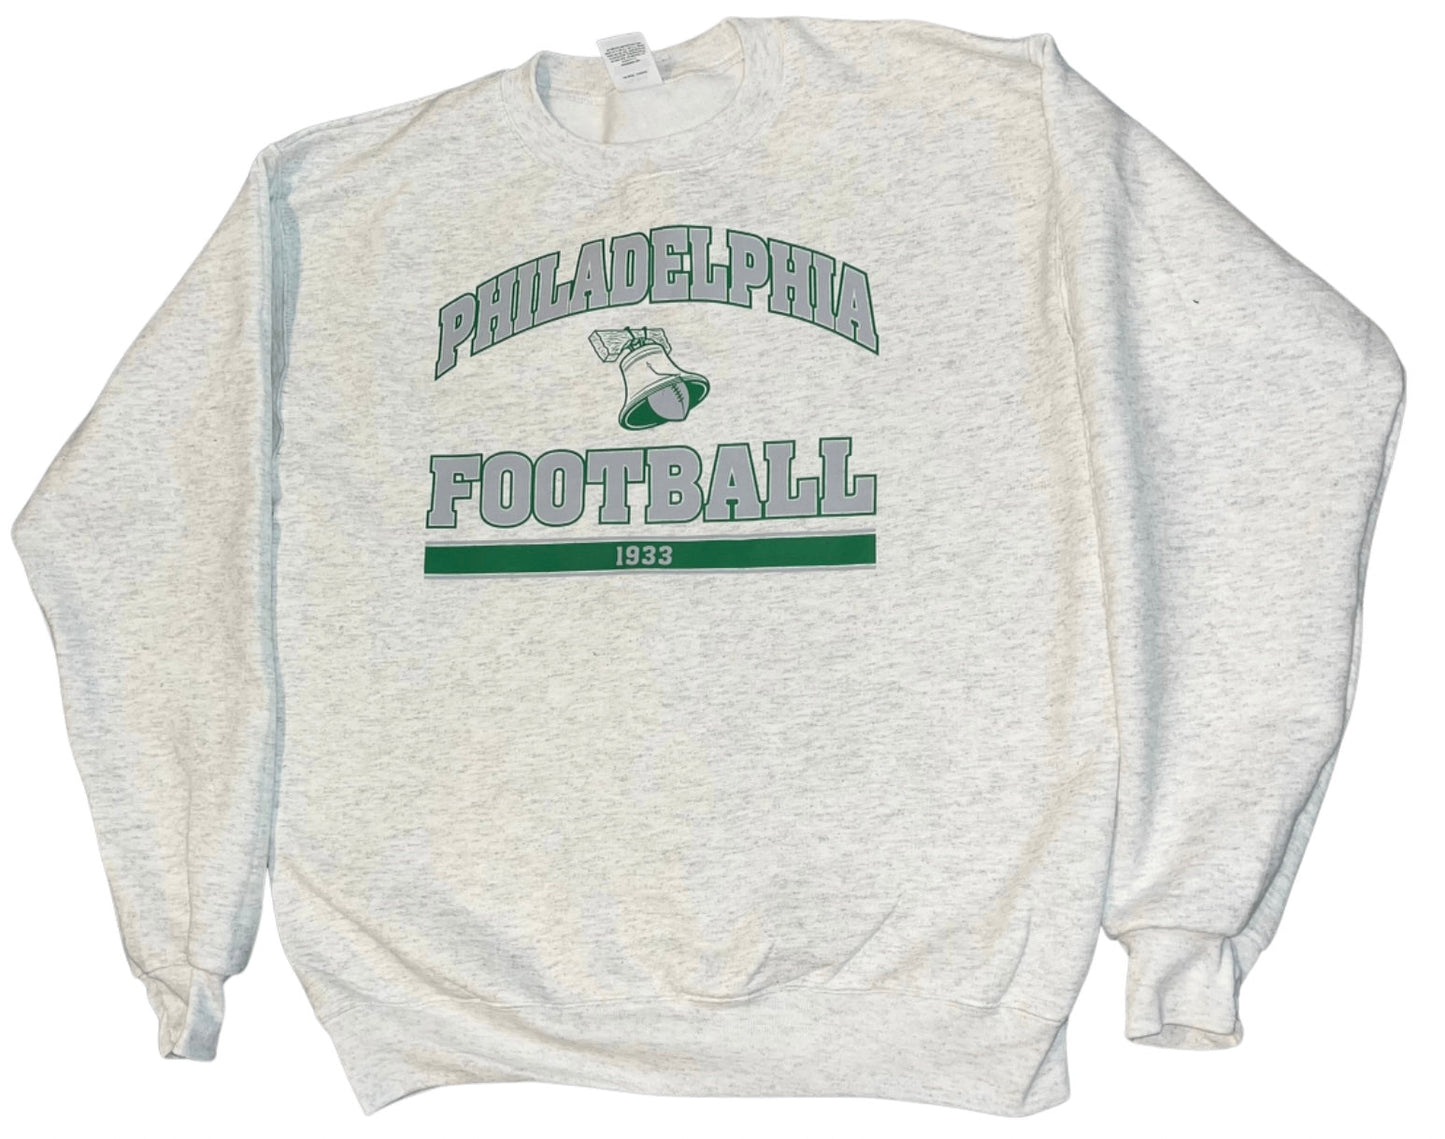 Philly Arched Football sweatshirt- ash gray